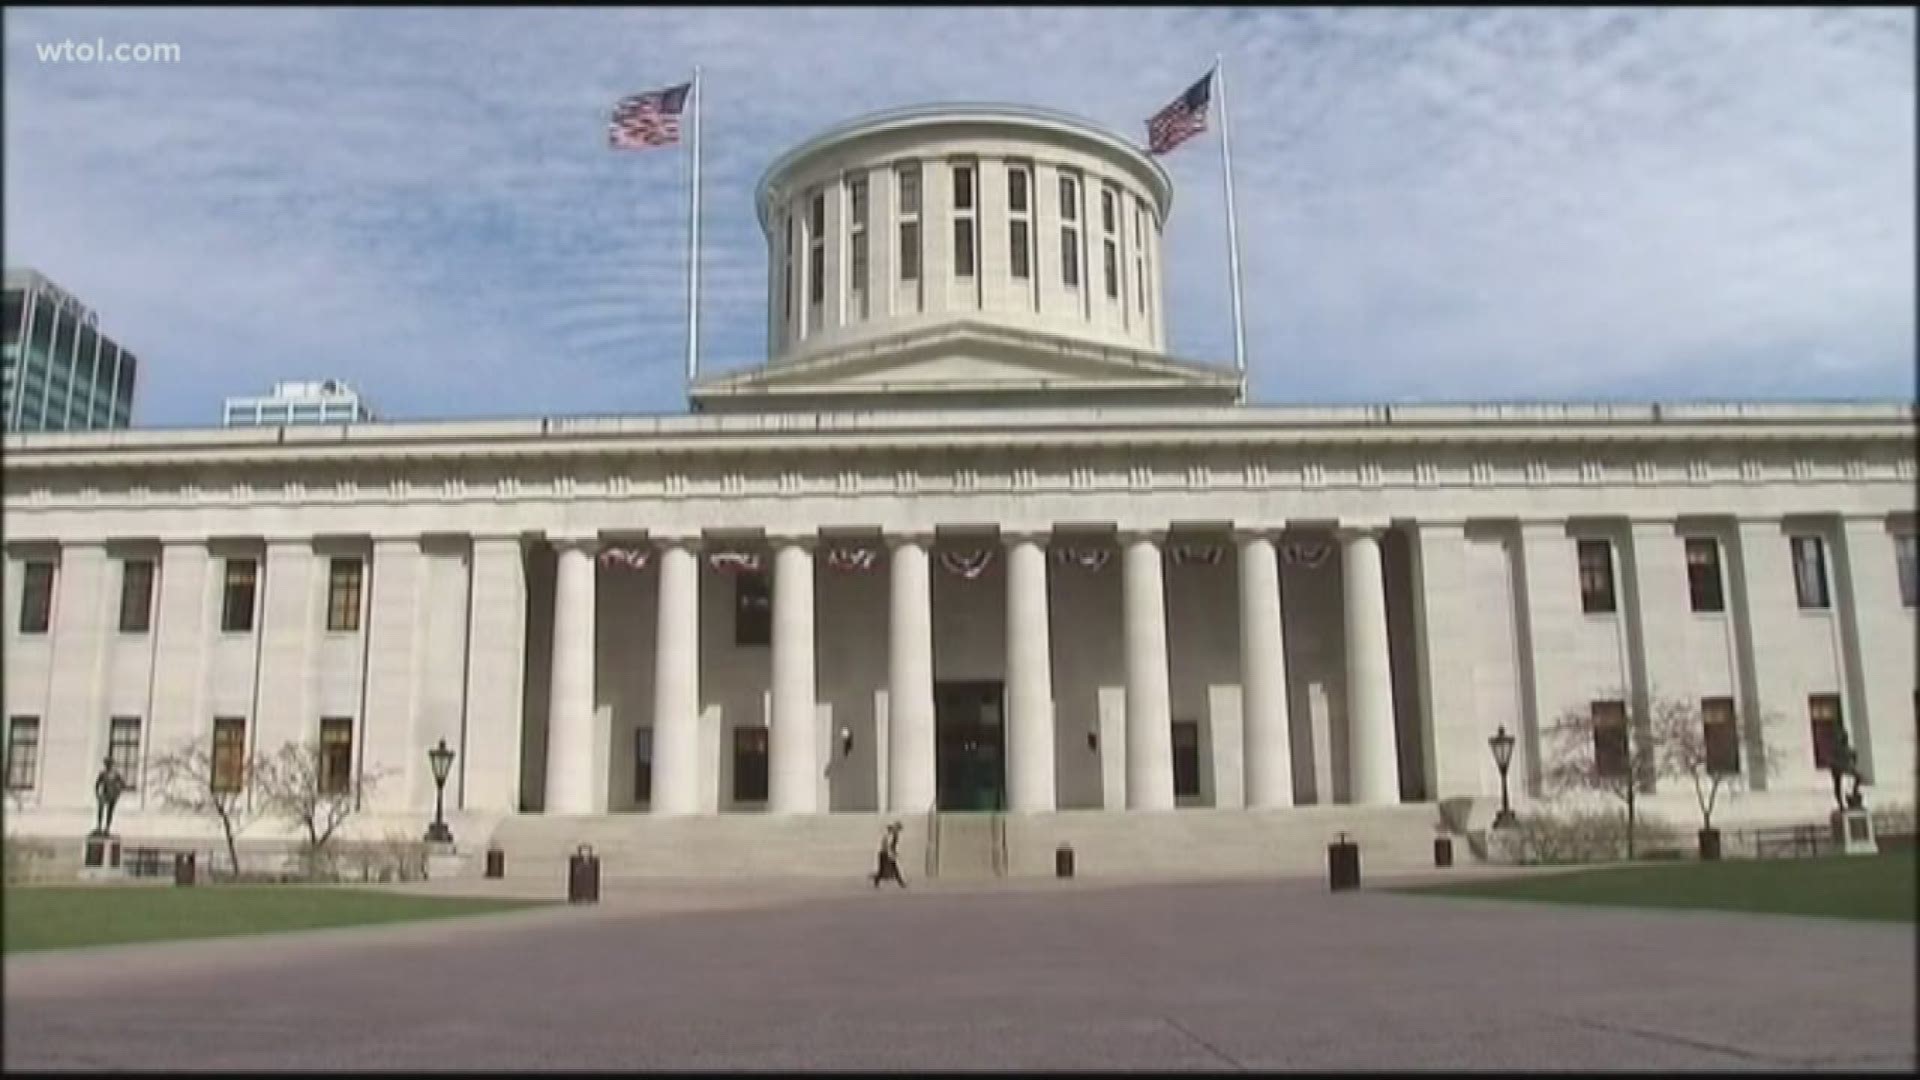 Bills working their way through the Ohio Legislature would reduce punishment for some drug crimes while favoring treatment over automatic prosecution.